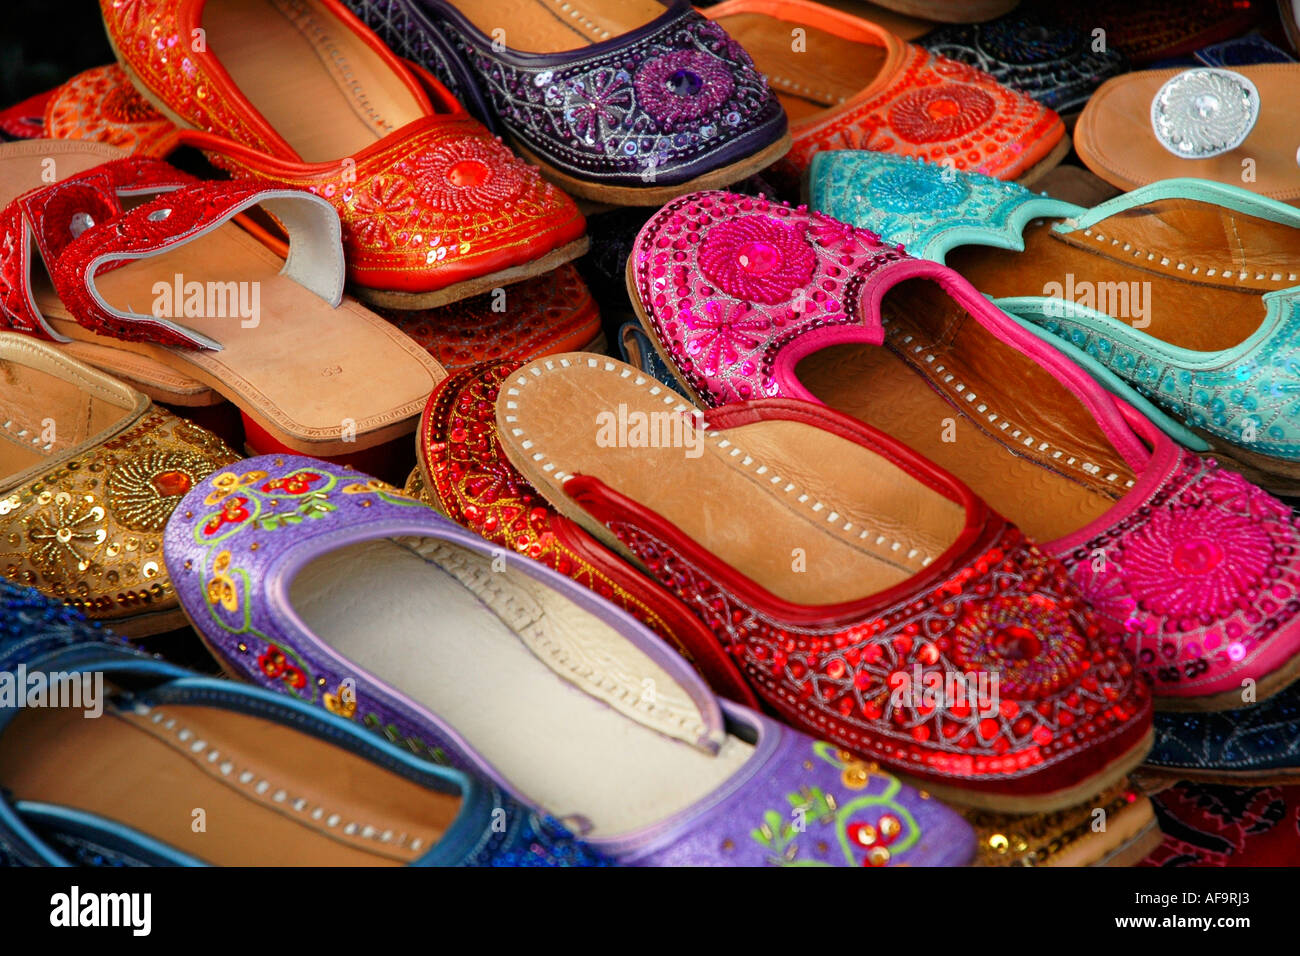 Colorful hand made Indian slippers for sale at an outdoor market Stock  Photo - Alamy